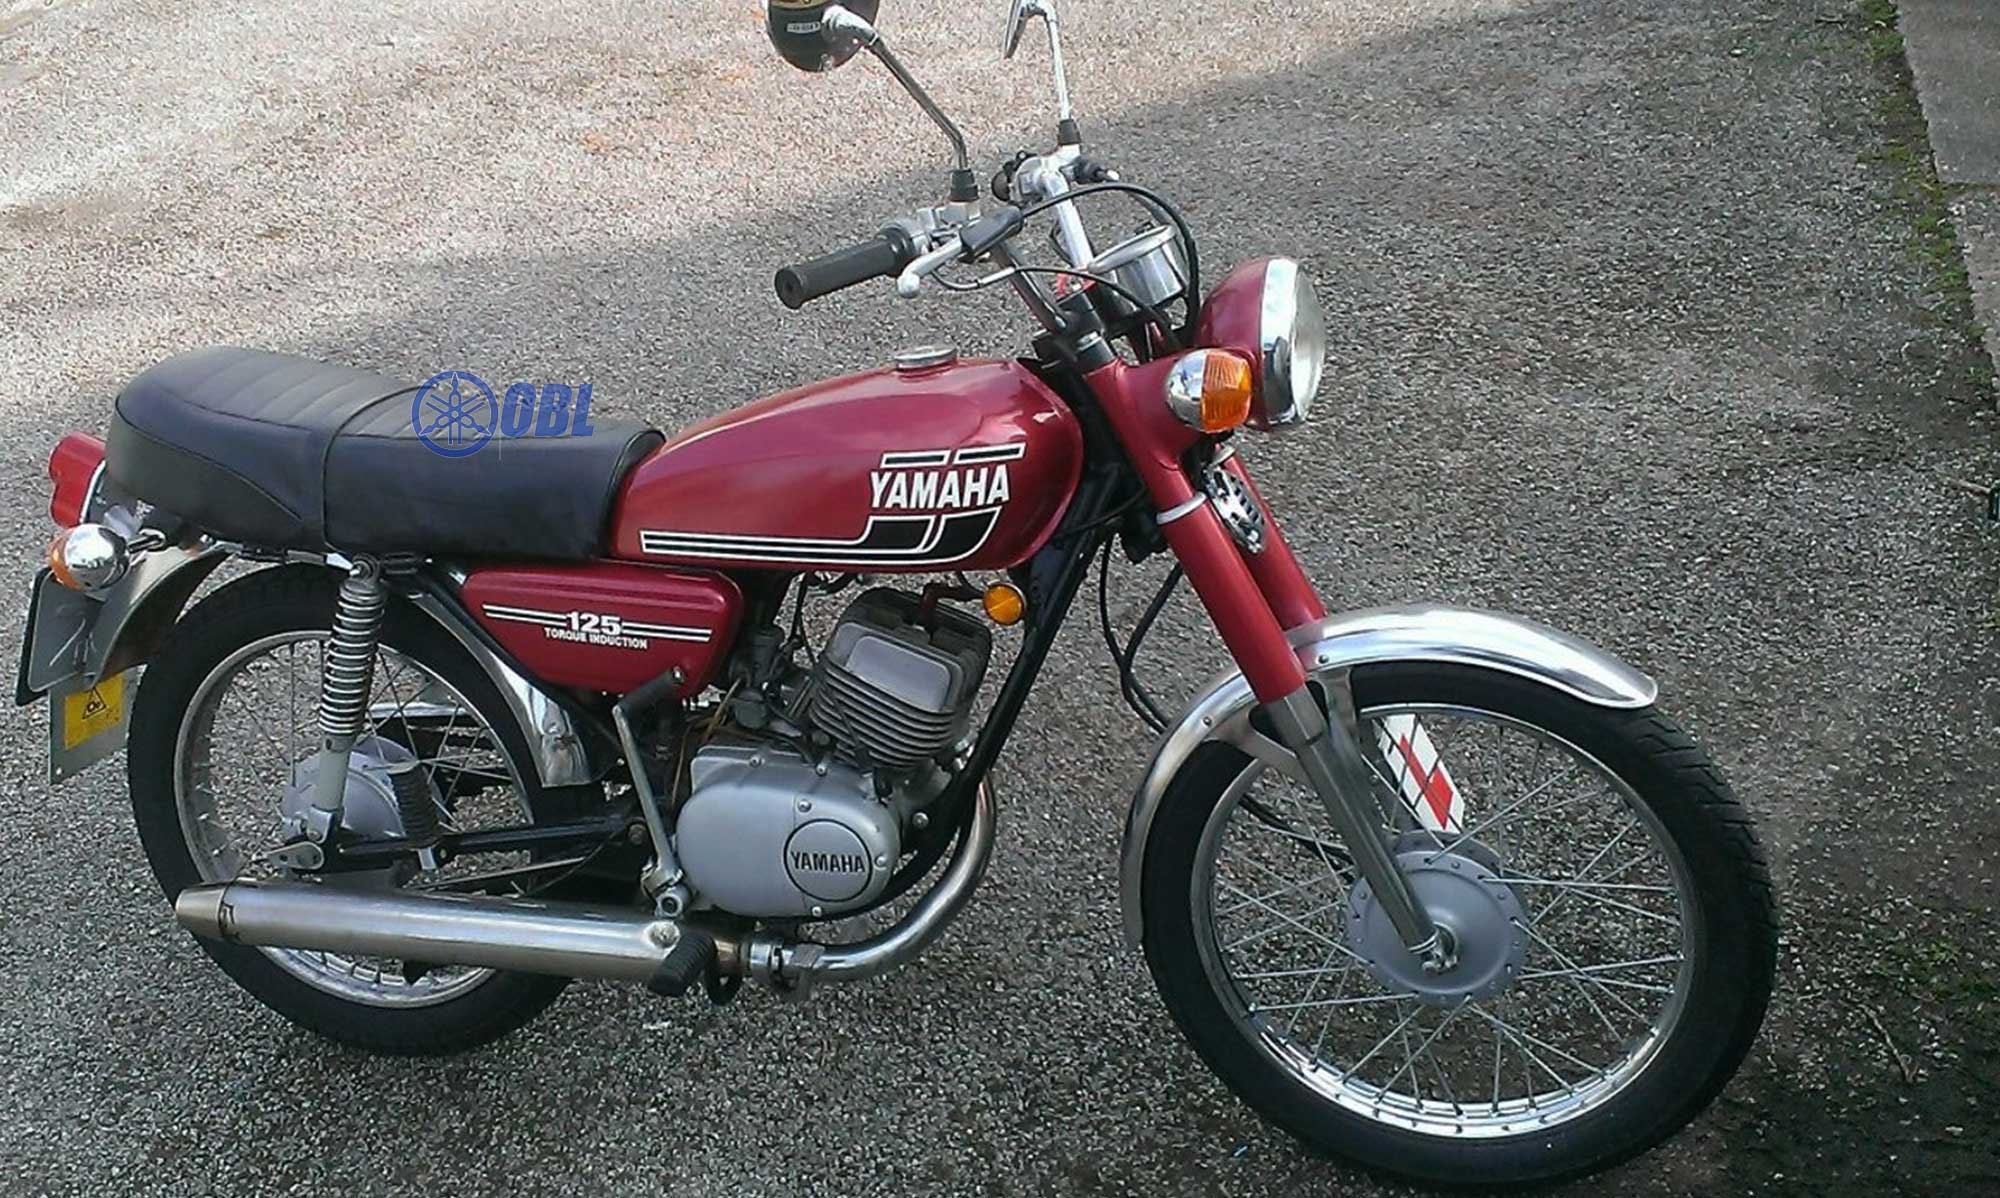 Yamaha RS125 Small Size 2-Stroke Bike Red